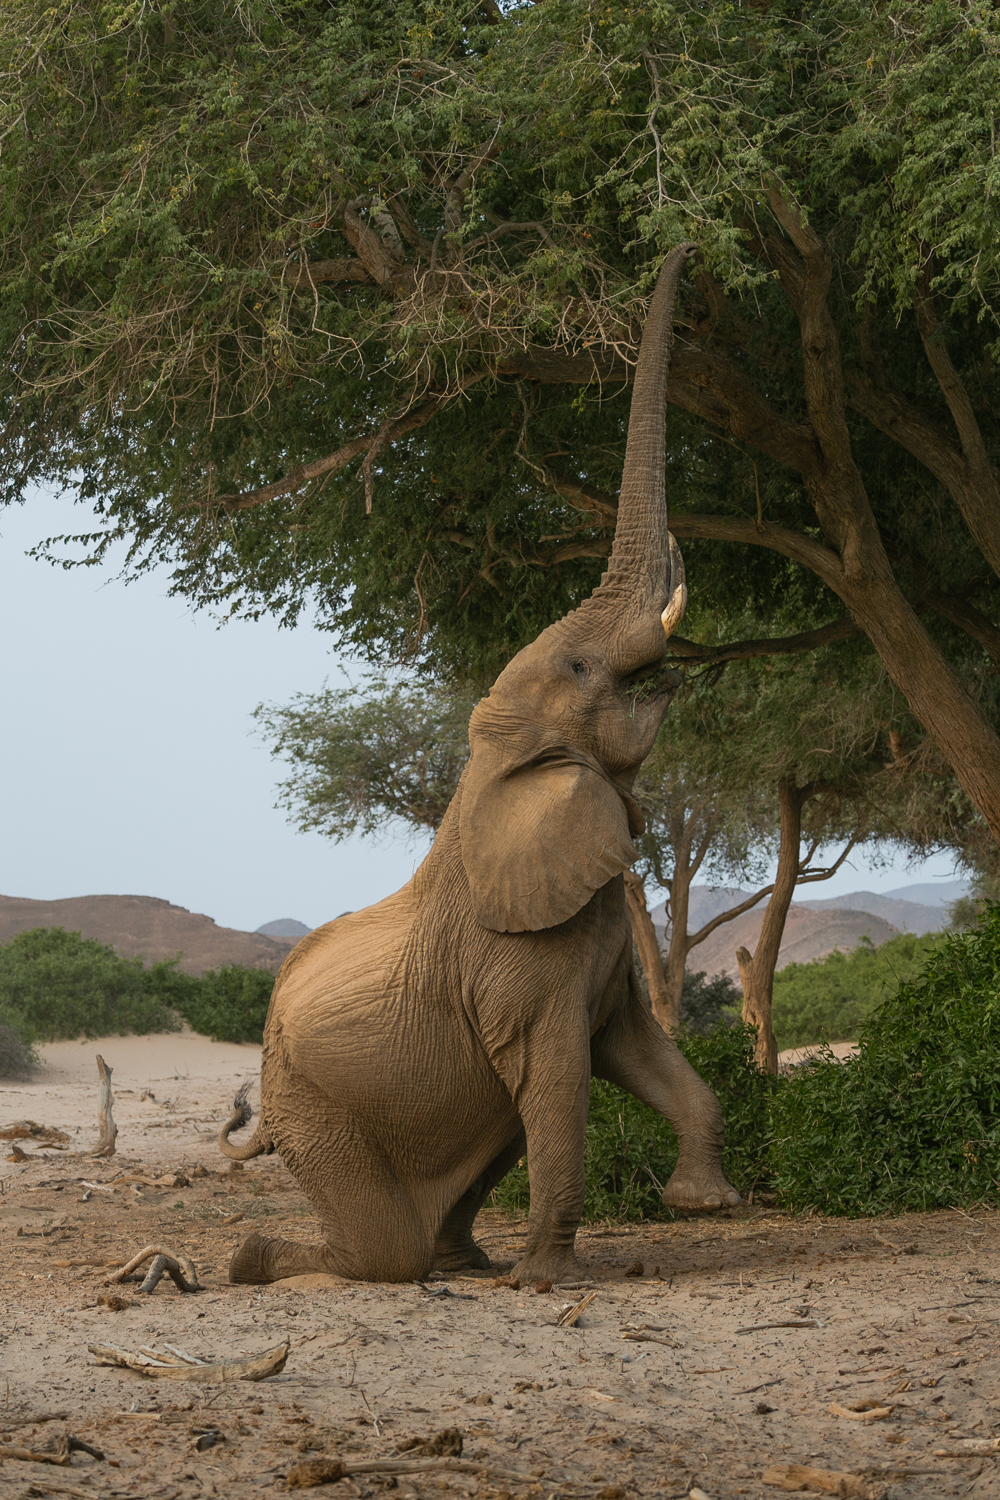 A desert adapted elephant in the Hoanib River valley